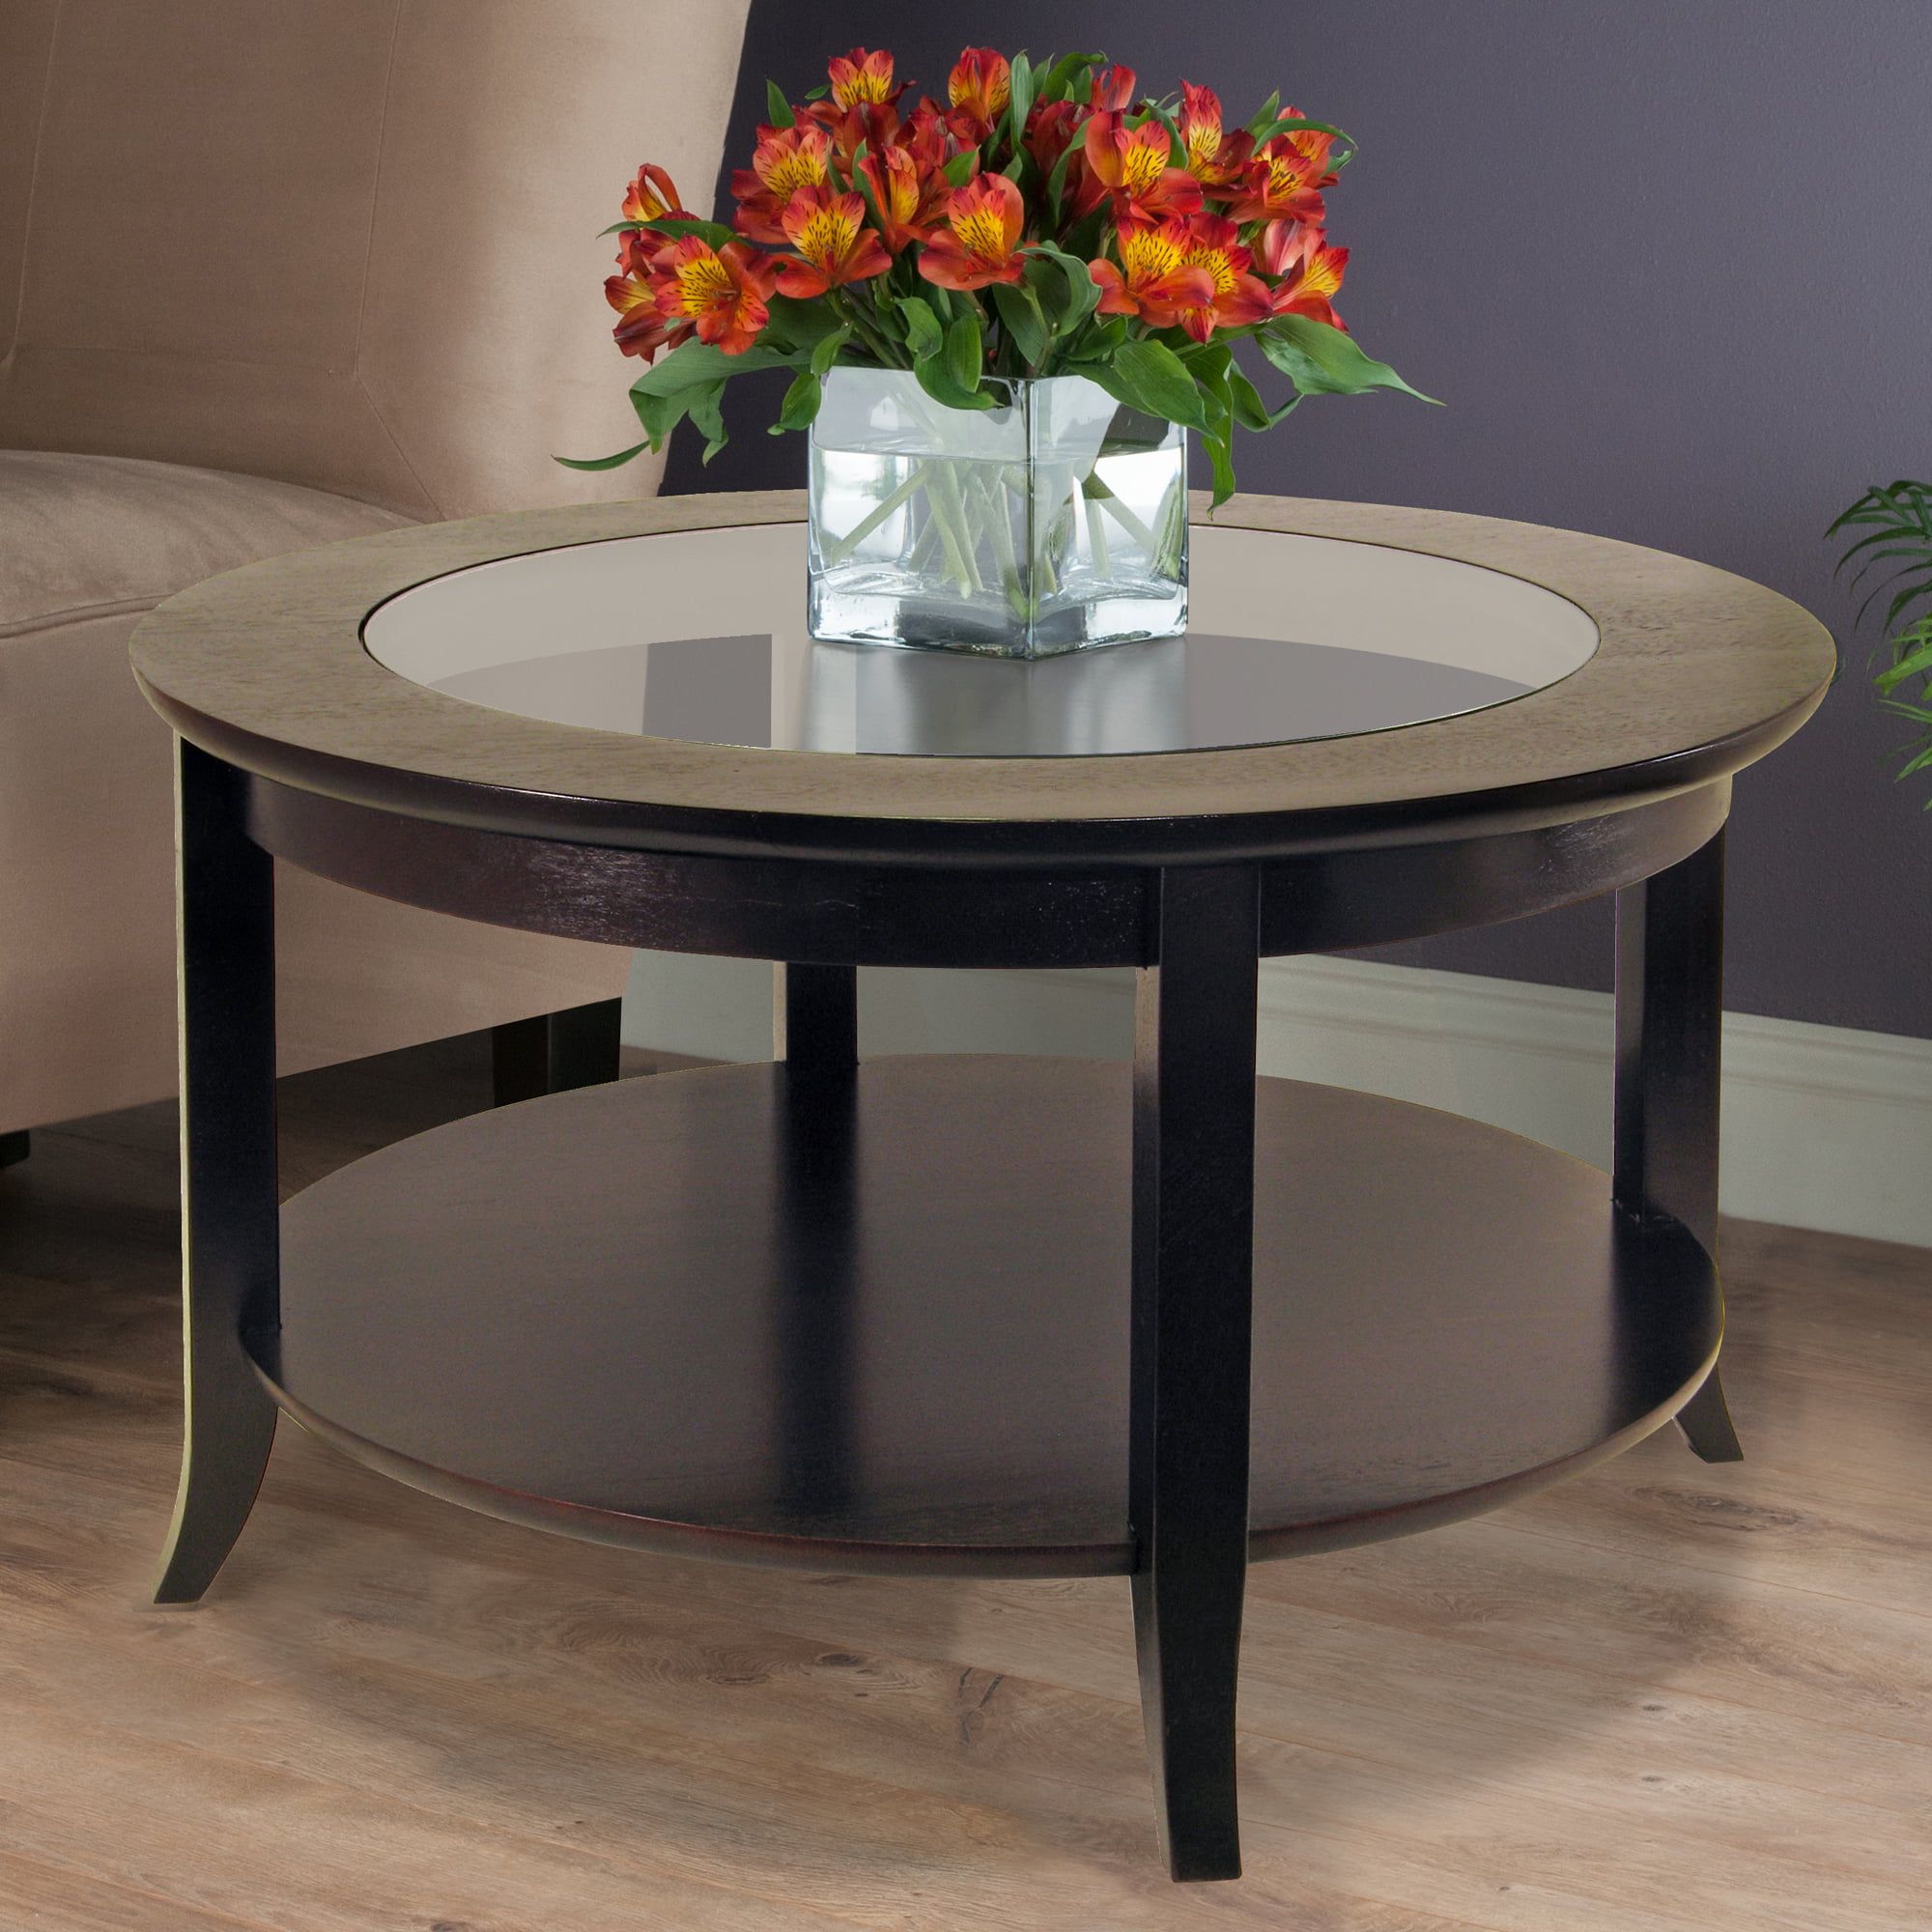 Winsome Wood Genoa Round Coffee Table With Glass Top, Espresso Finish Inside Round Coffee Tables (View 4 of 20)